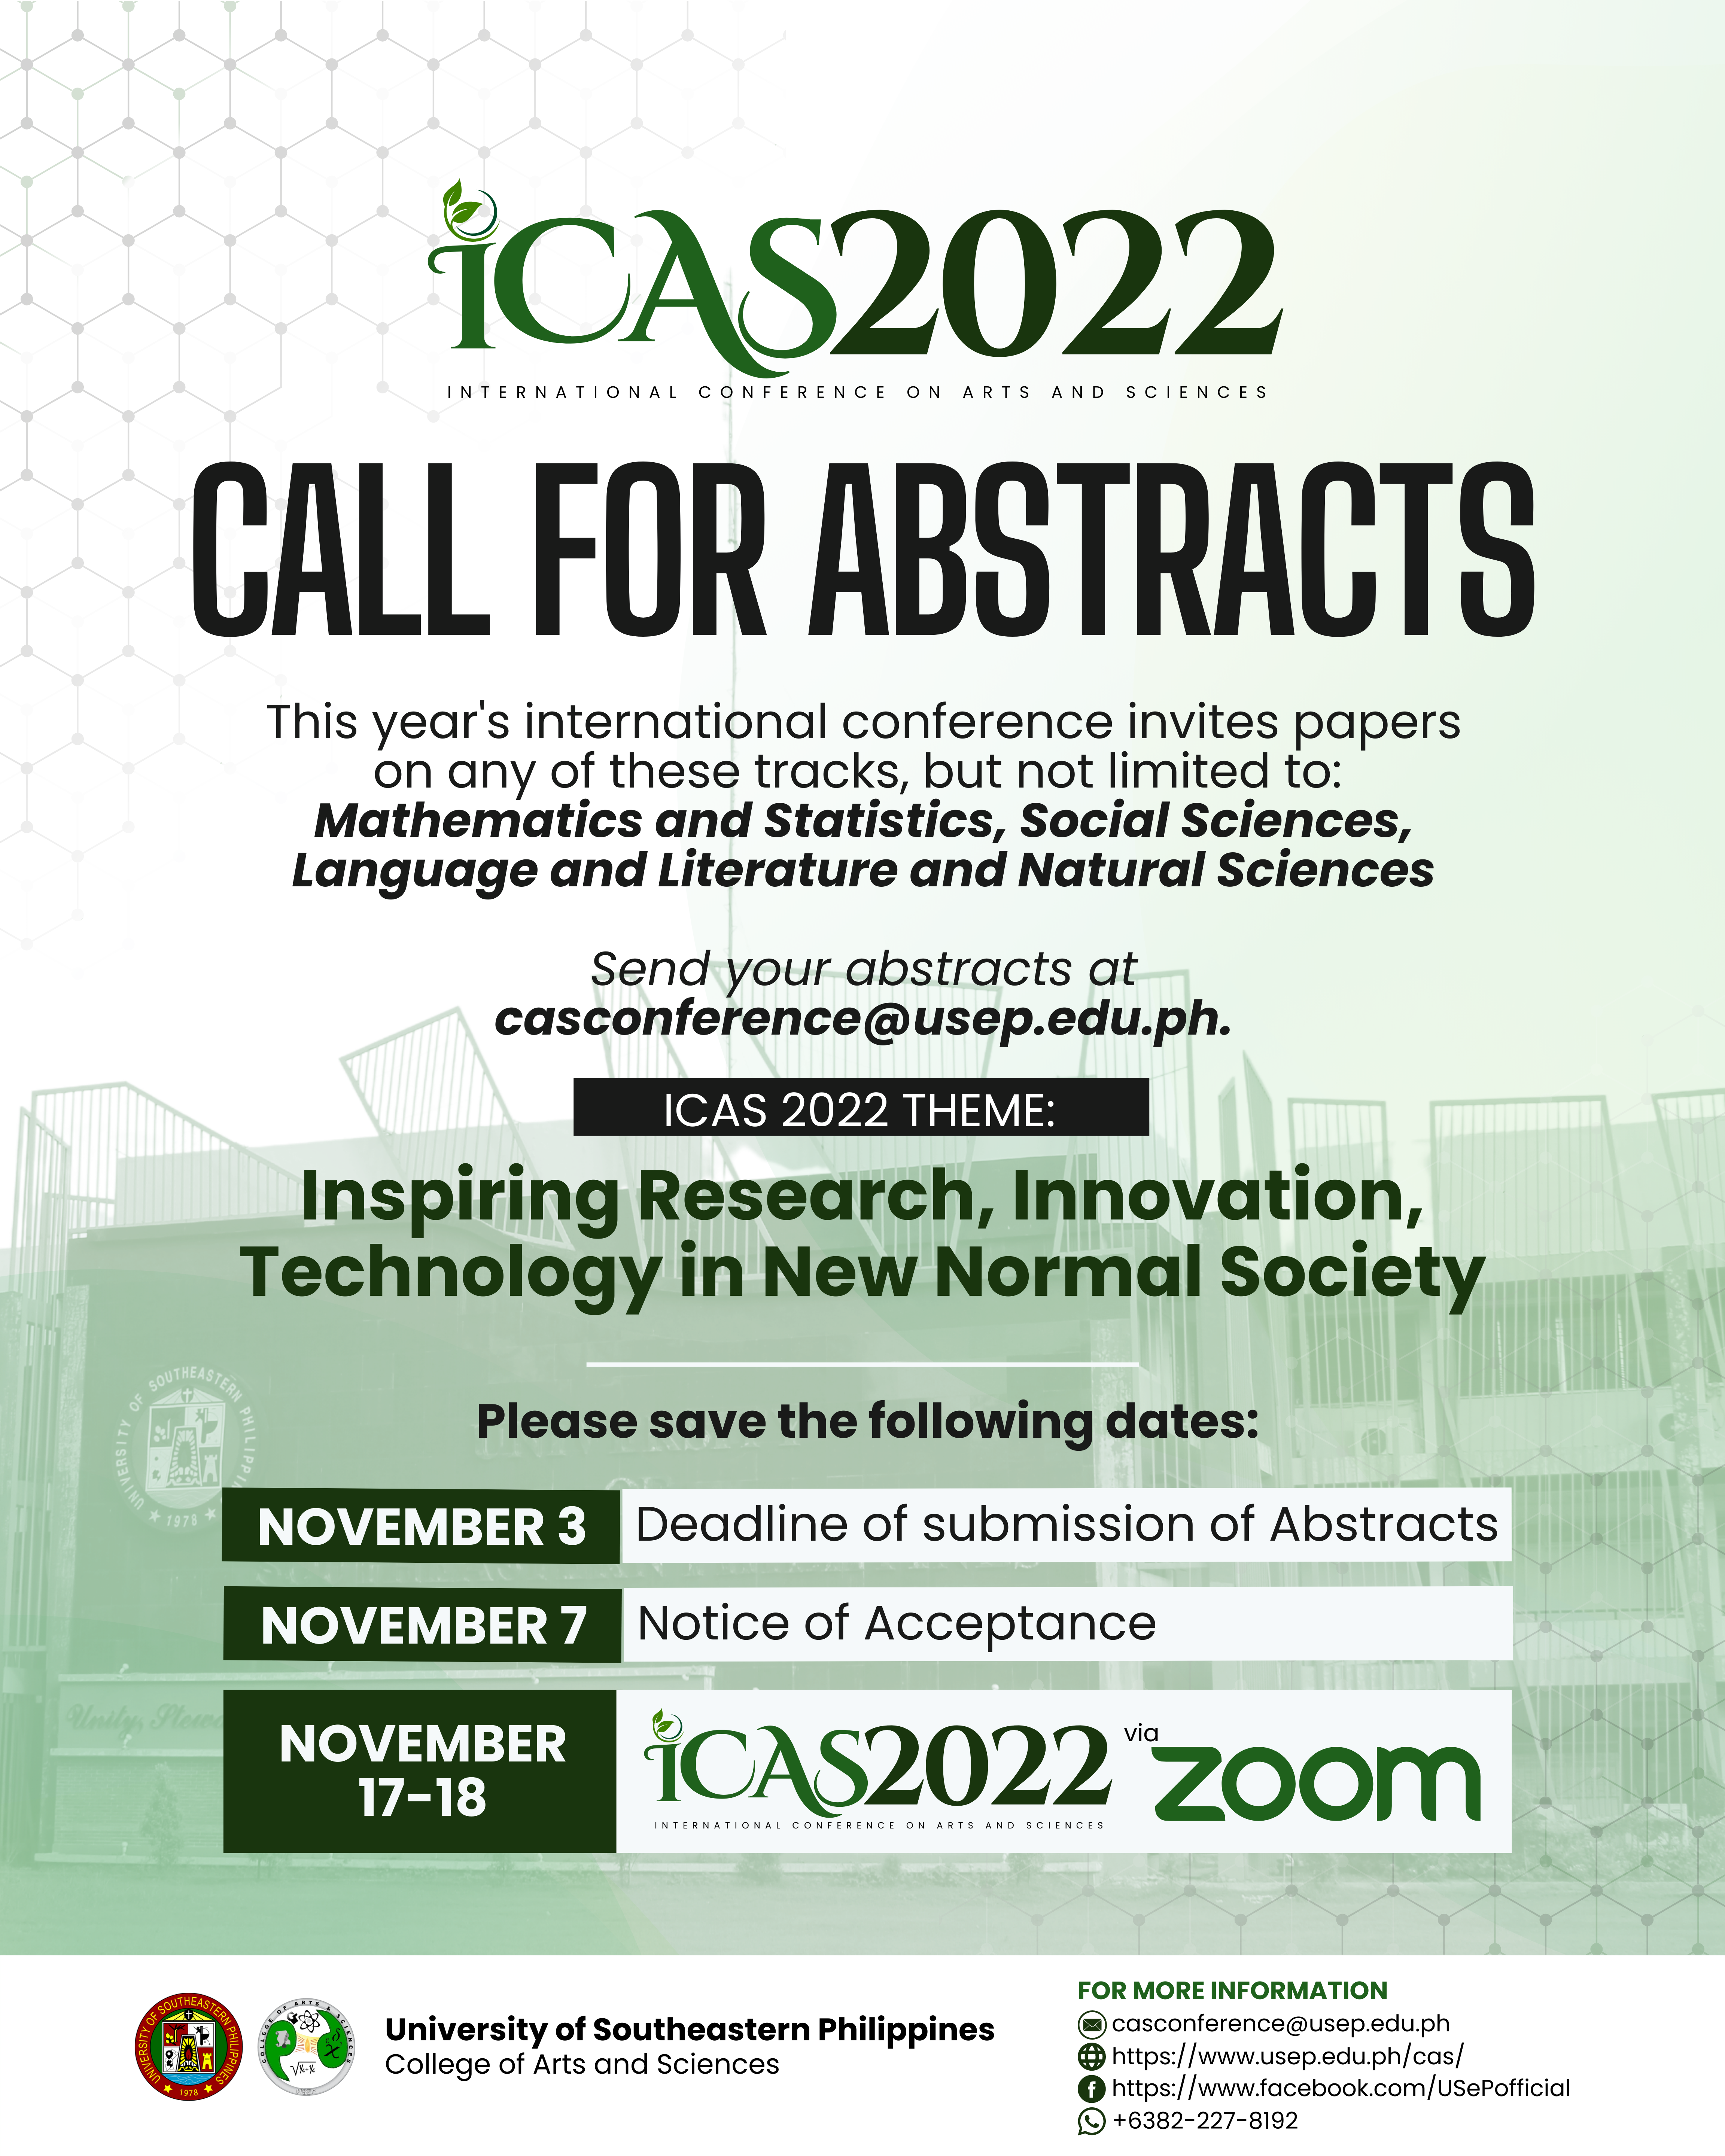 [𝗖𝗔𝗟𝗟 𝗙𝗢𝗥 𝗔𝗕𝗦𝗧𝗥𝗔𝗖𝗧S] The International Conference on Arts and Sciences (ICAS) is back for the second time on November 17-18, 2022, with the theme, “Inspiring Research, Innovation, Technology in New Normal Society”.